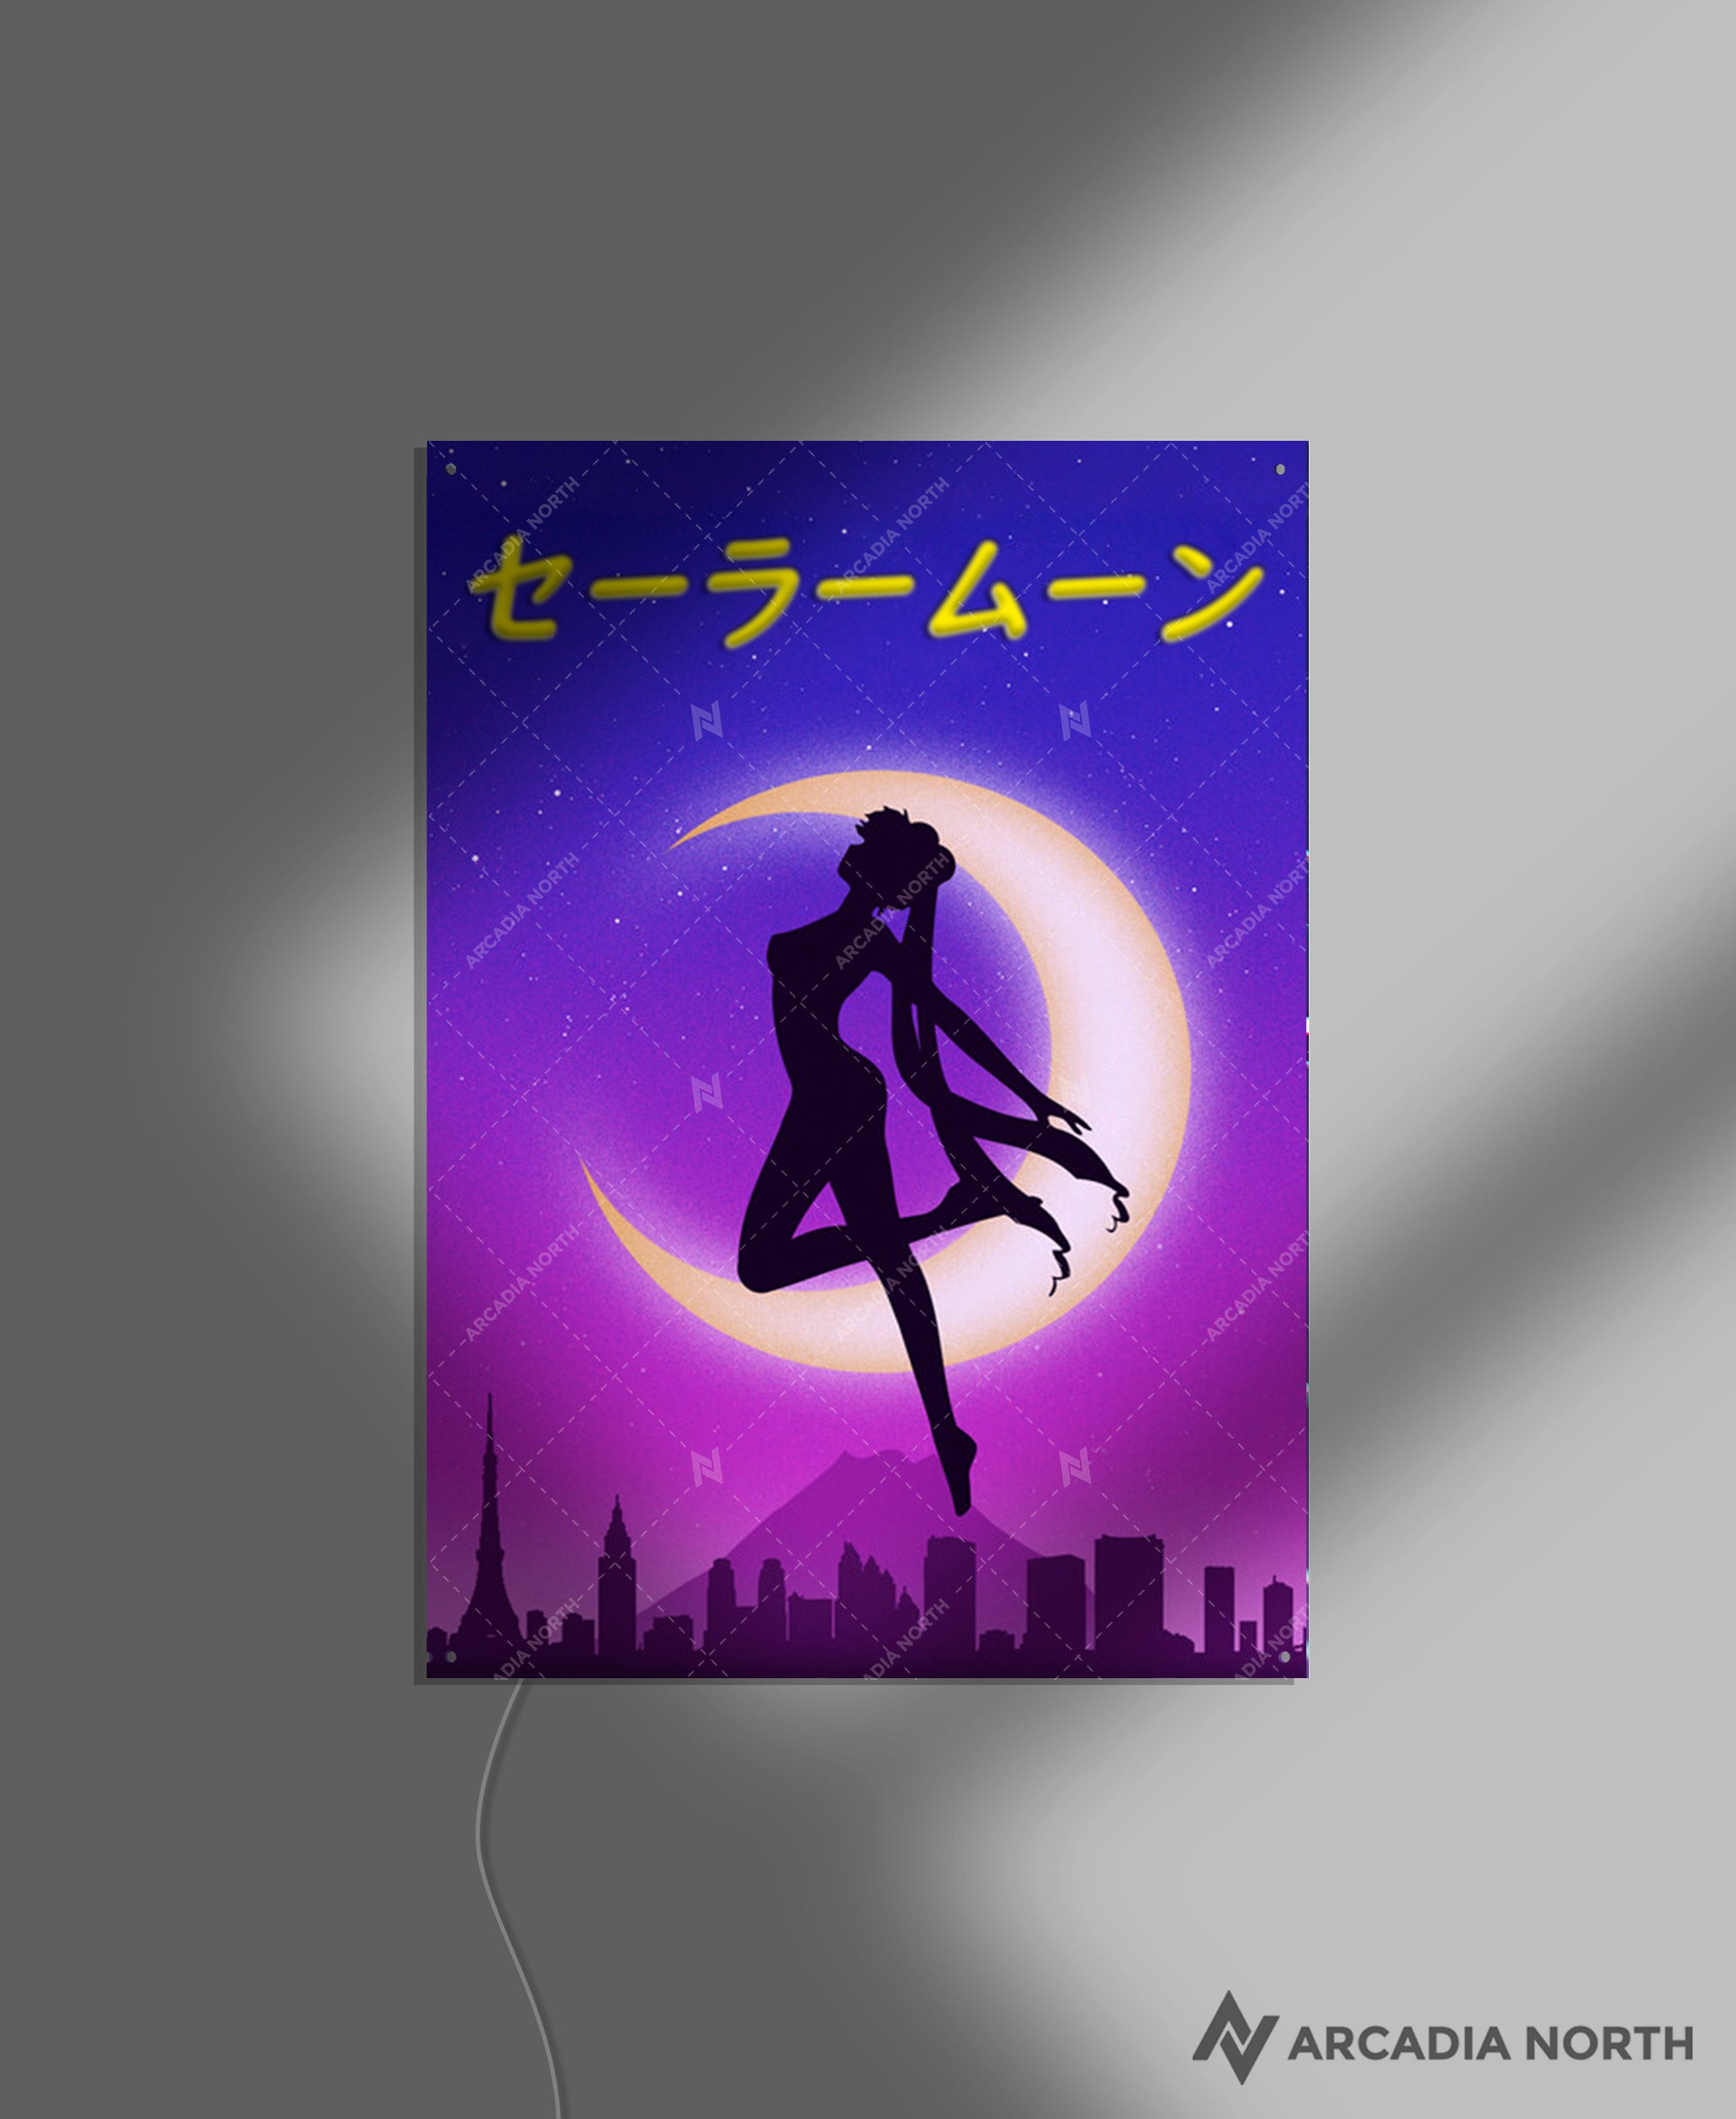 Arcadia North AURALIGHT - an acrylic LED Poster featuring the anime Sailor Moon with Usagi Tsukino. Sailor Moon is written in Japanese Katakana and illuminated by glowing neon LED lights. UV-printed on acrylic.